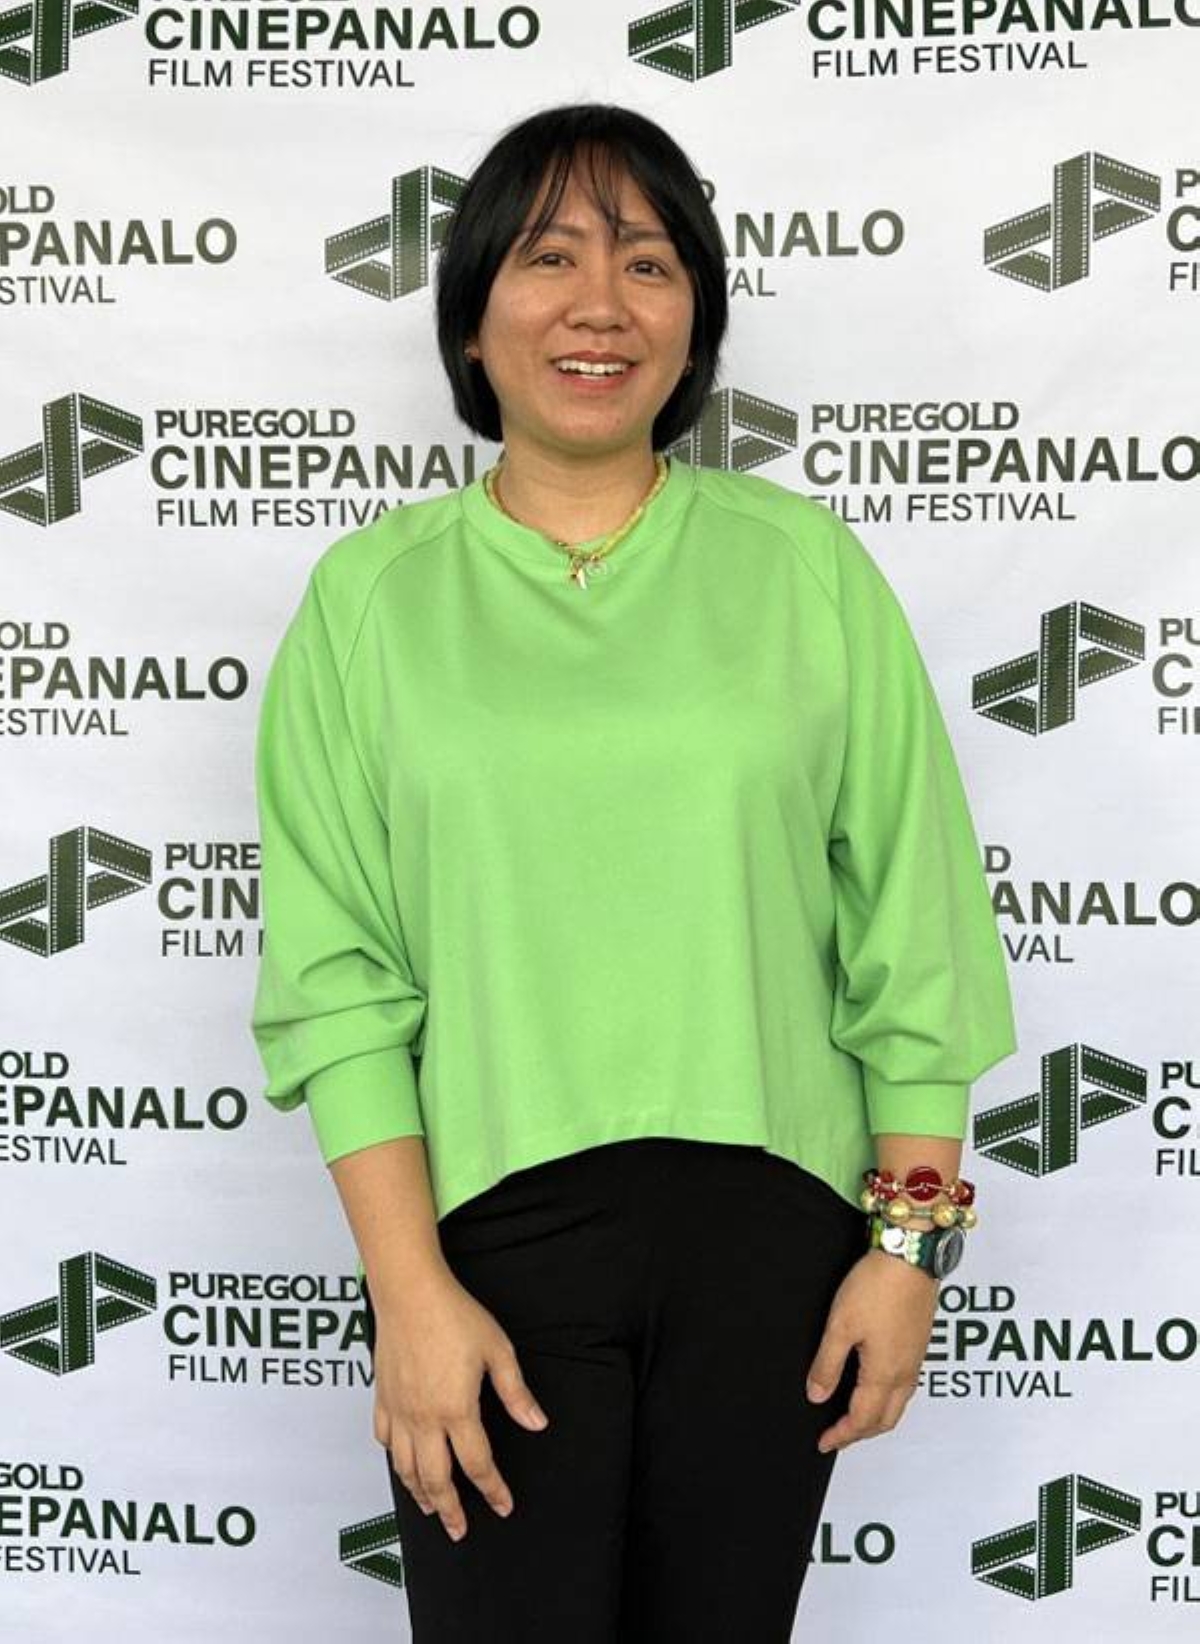 Puregold Senior Manager for Marketing Ivy Hayagan-Piedad affirms that through CinePanalo Film Festival, the company demonstrates its commitment to telling the ‘panalo’ stories of Filipinos.